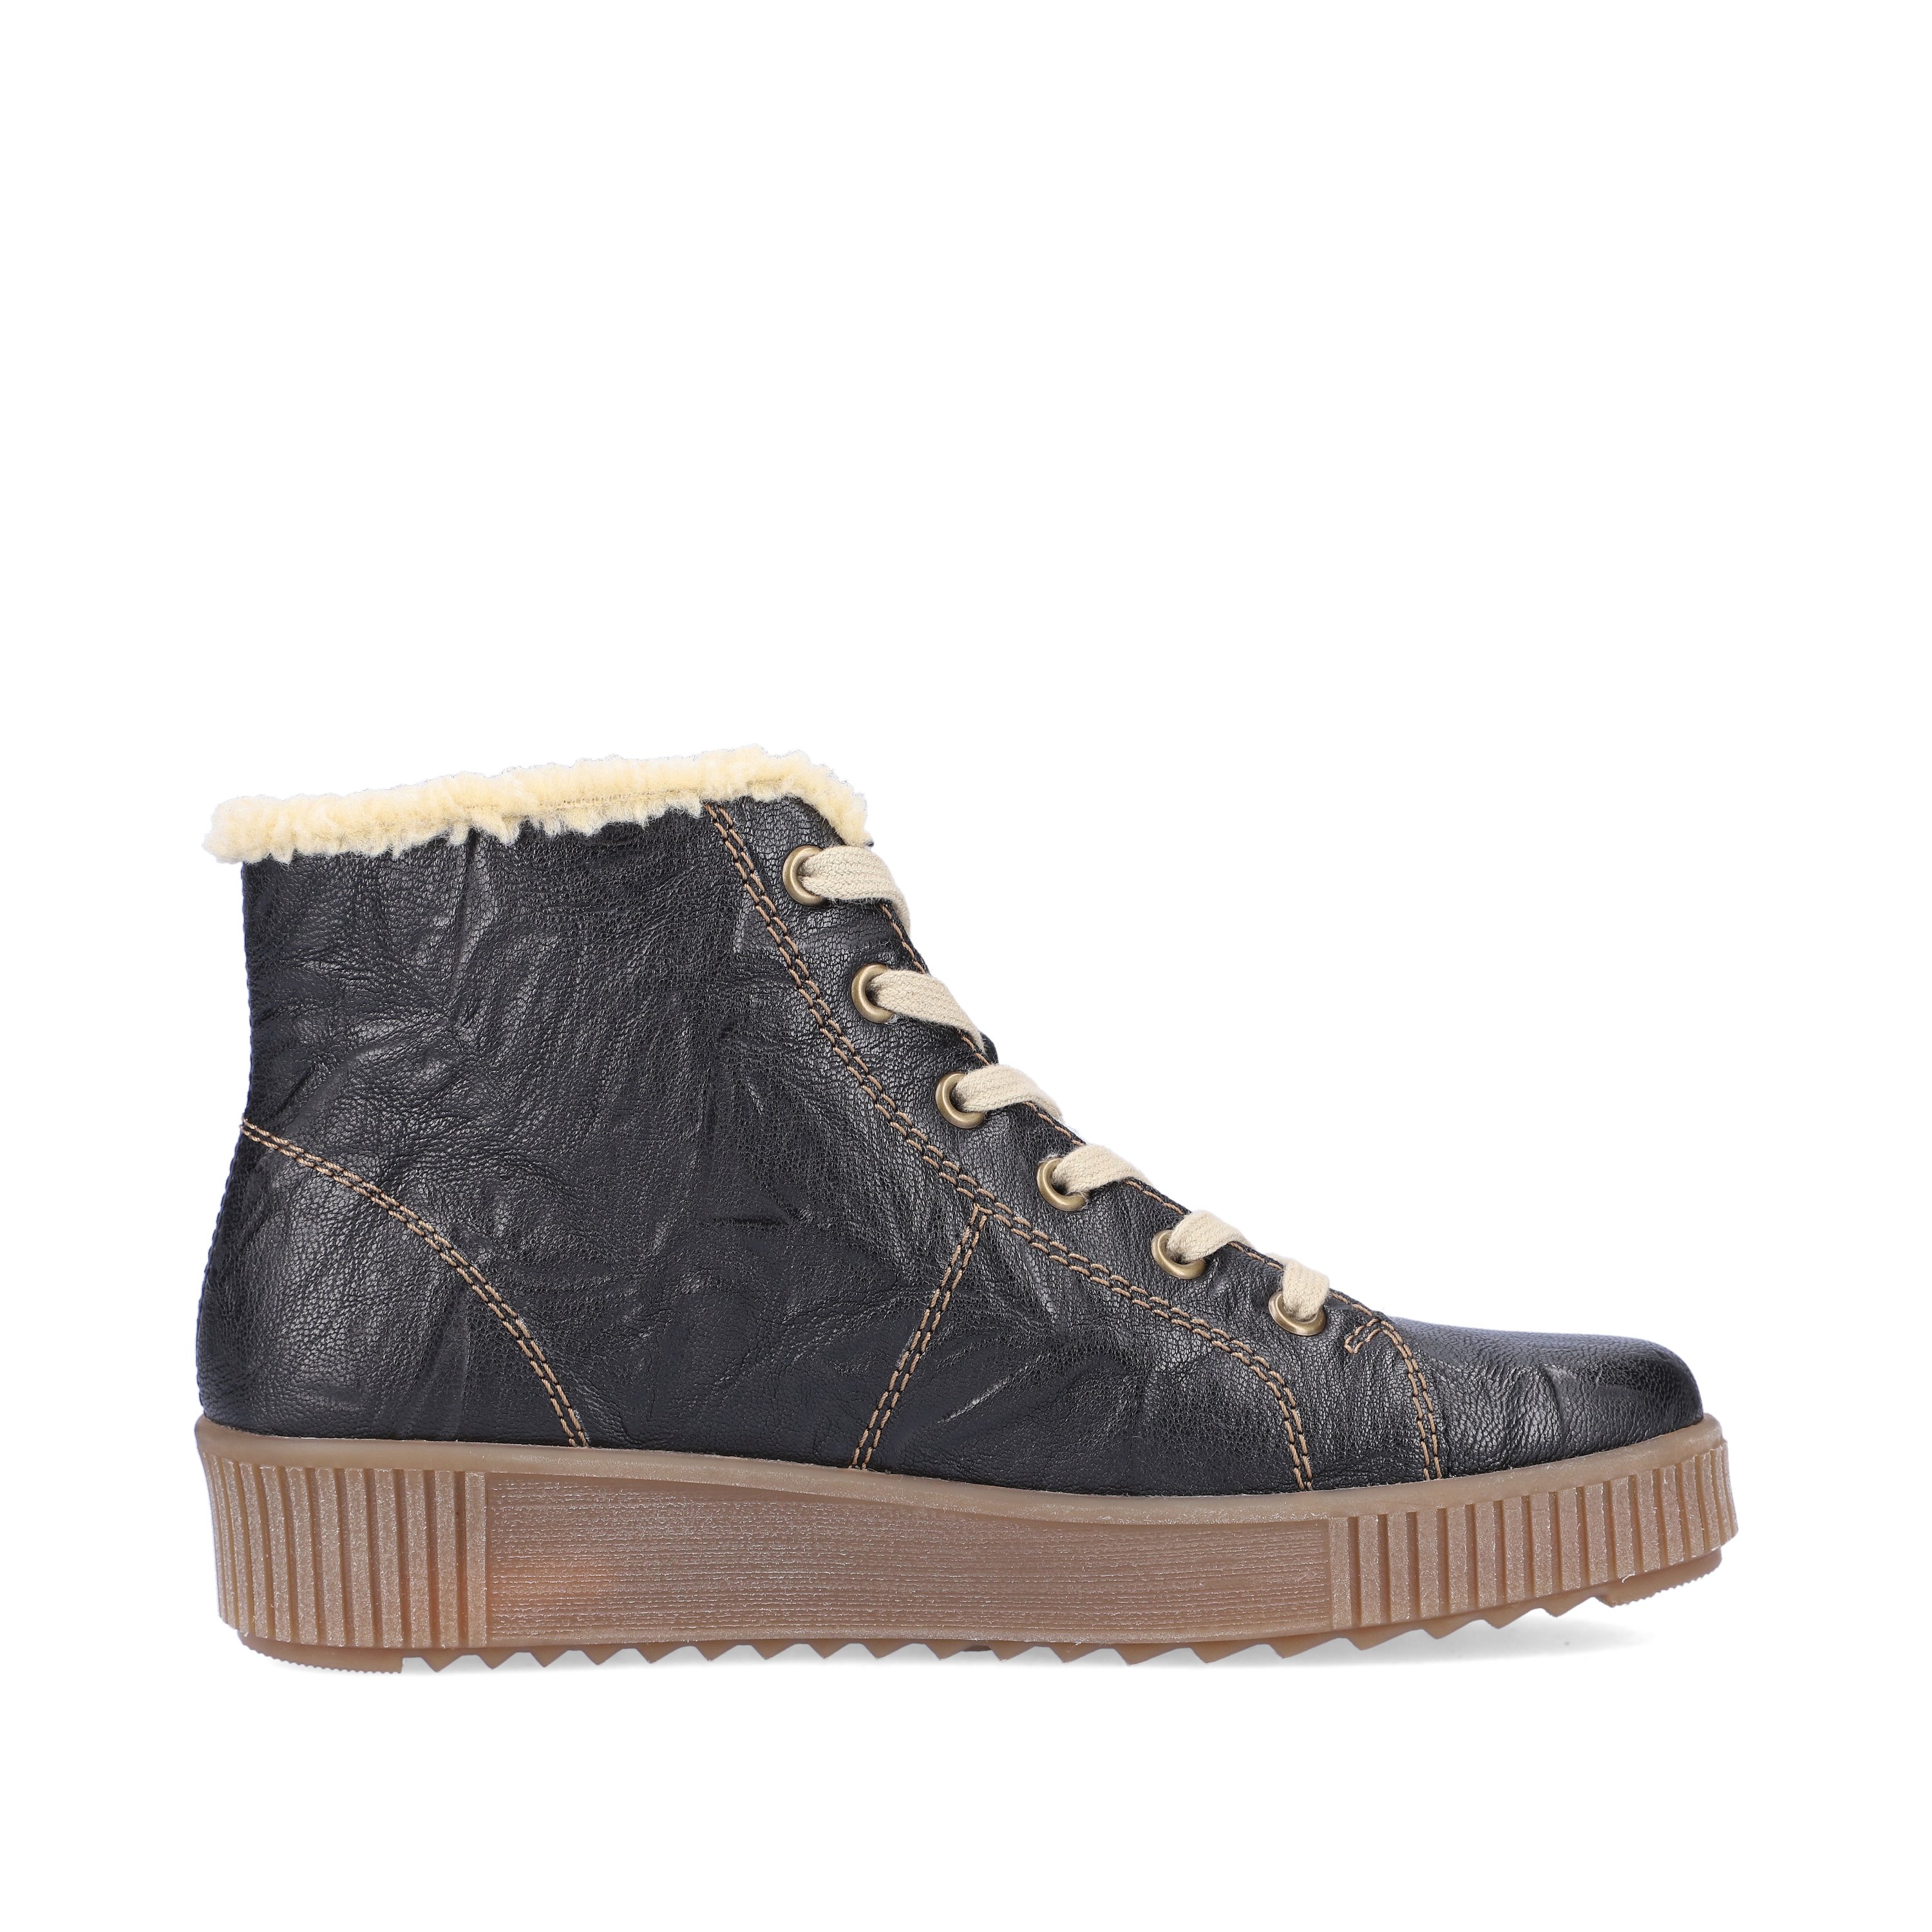 Steel black remonte women´s lace-up boots R7980-02 with cushioning platform sole. Shoe inside